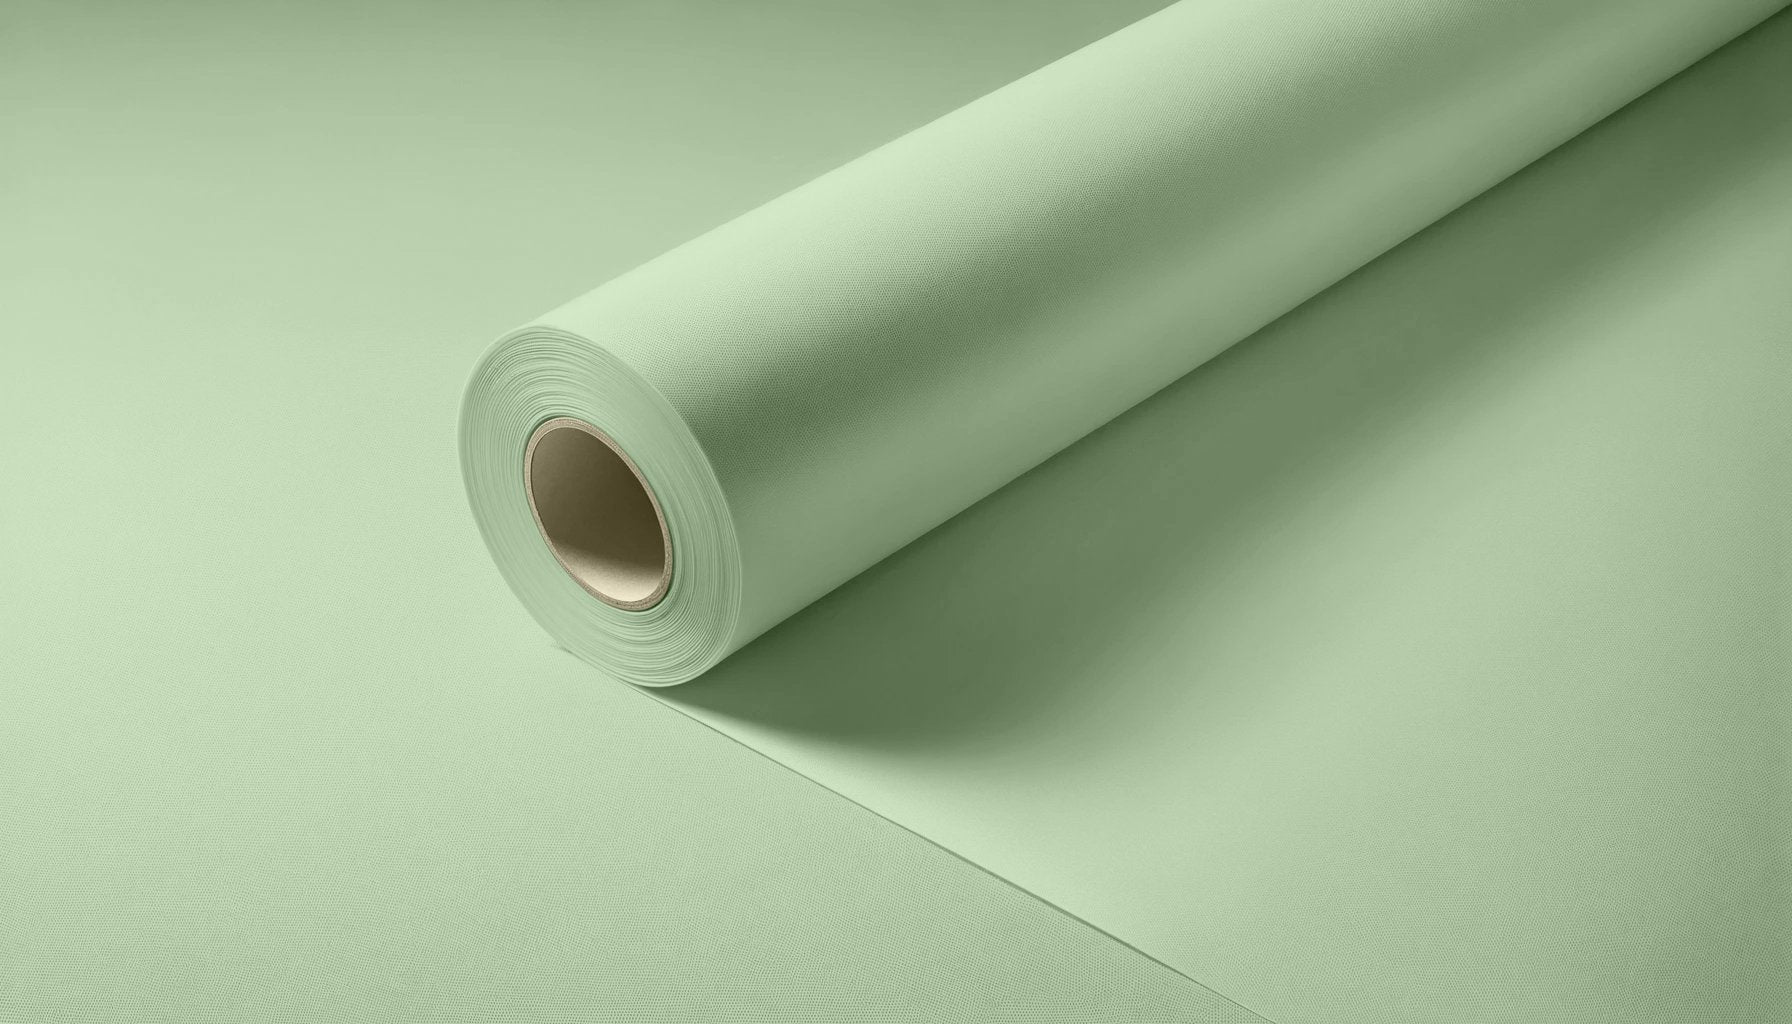 Peel & Stick Removable Re-usable Paint - Color RAL 6019 Pastel Green - offRAL™ - RALRAW LLC, USA